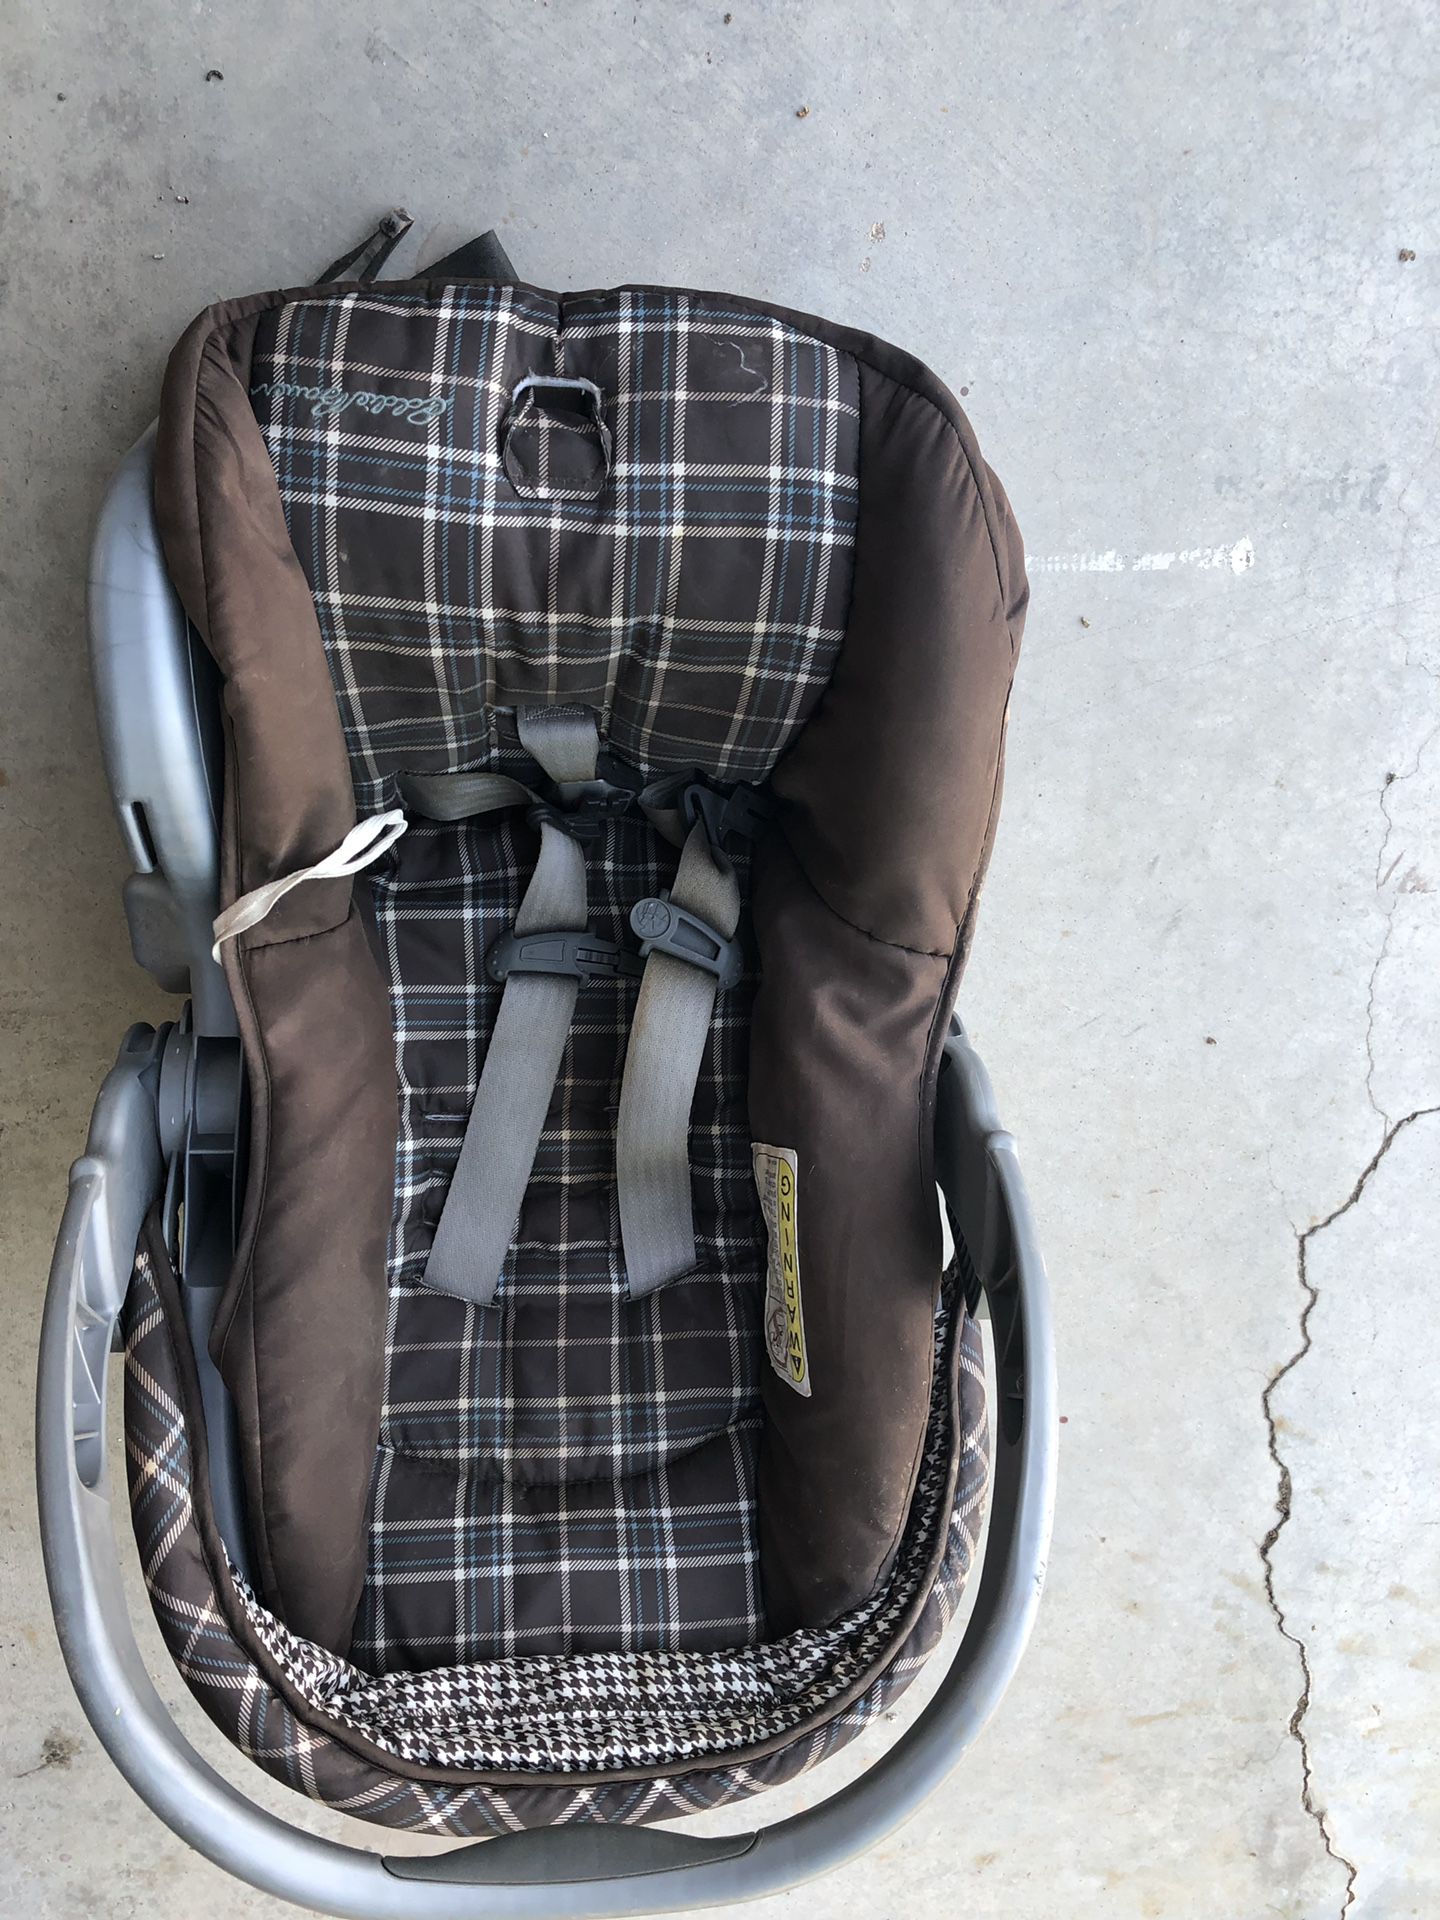 Three positioned car seat